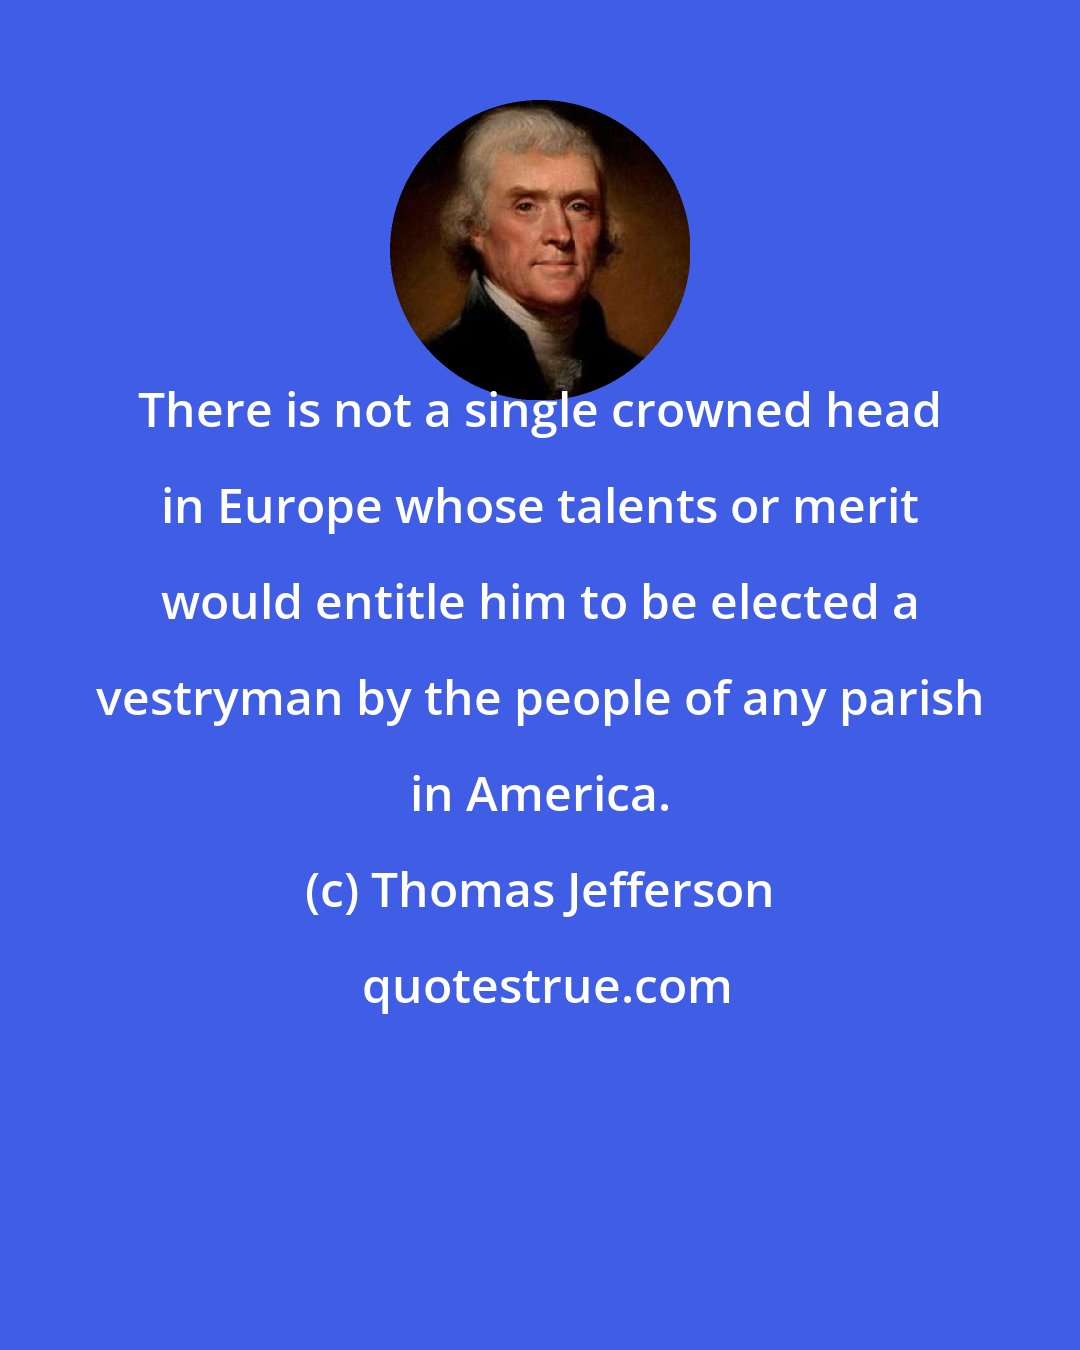 Thomas Jefferson: There is not a single crowned head in Europe whose talents or merit would entitle him to be elected a vestryman by the people of any parish in America.